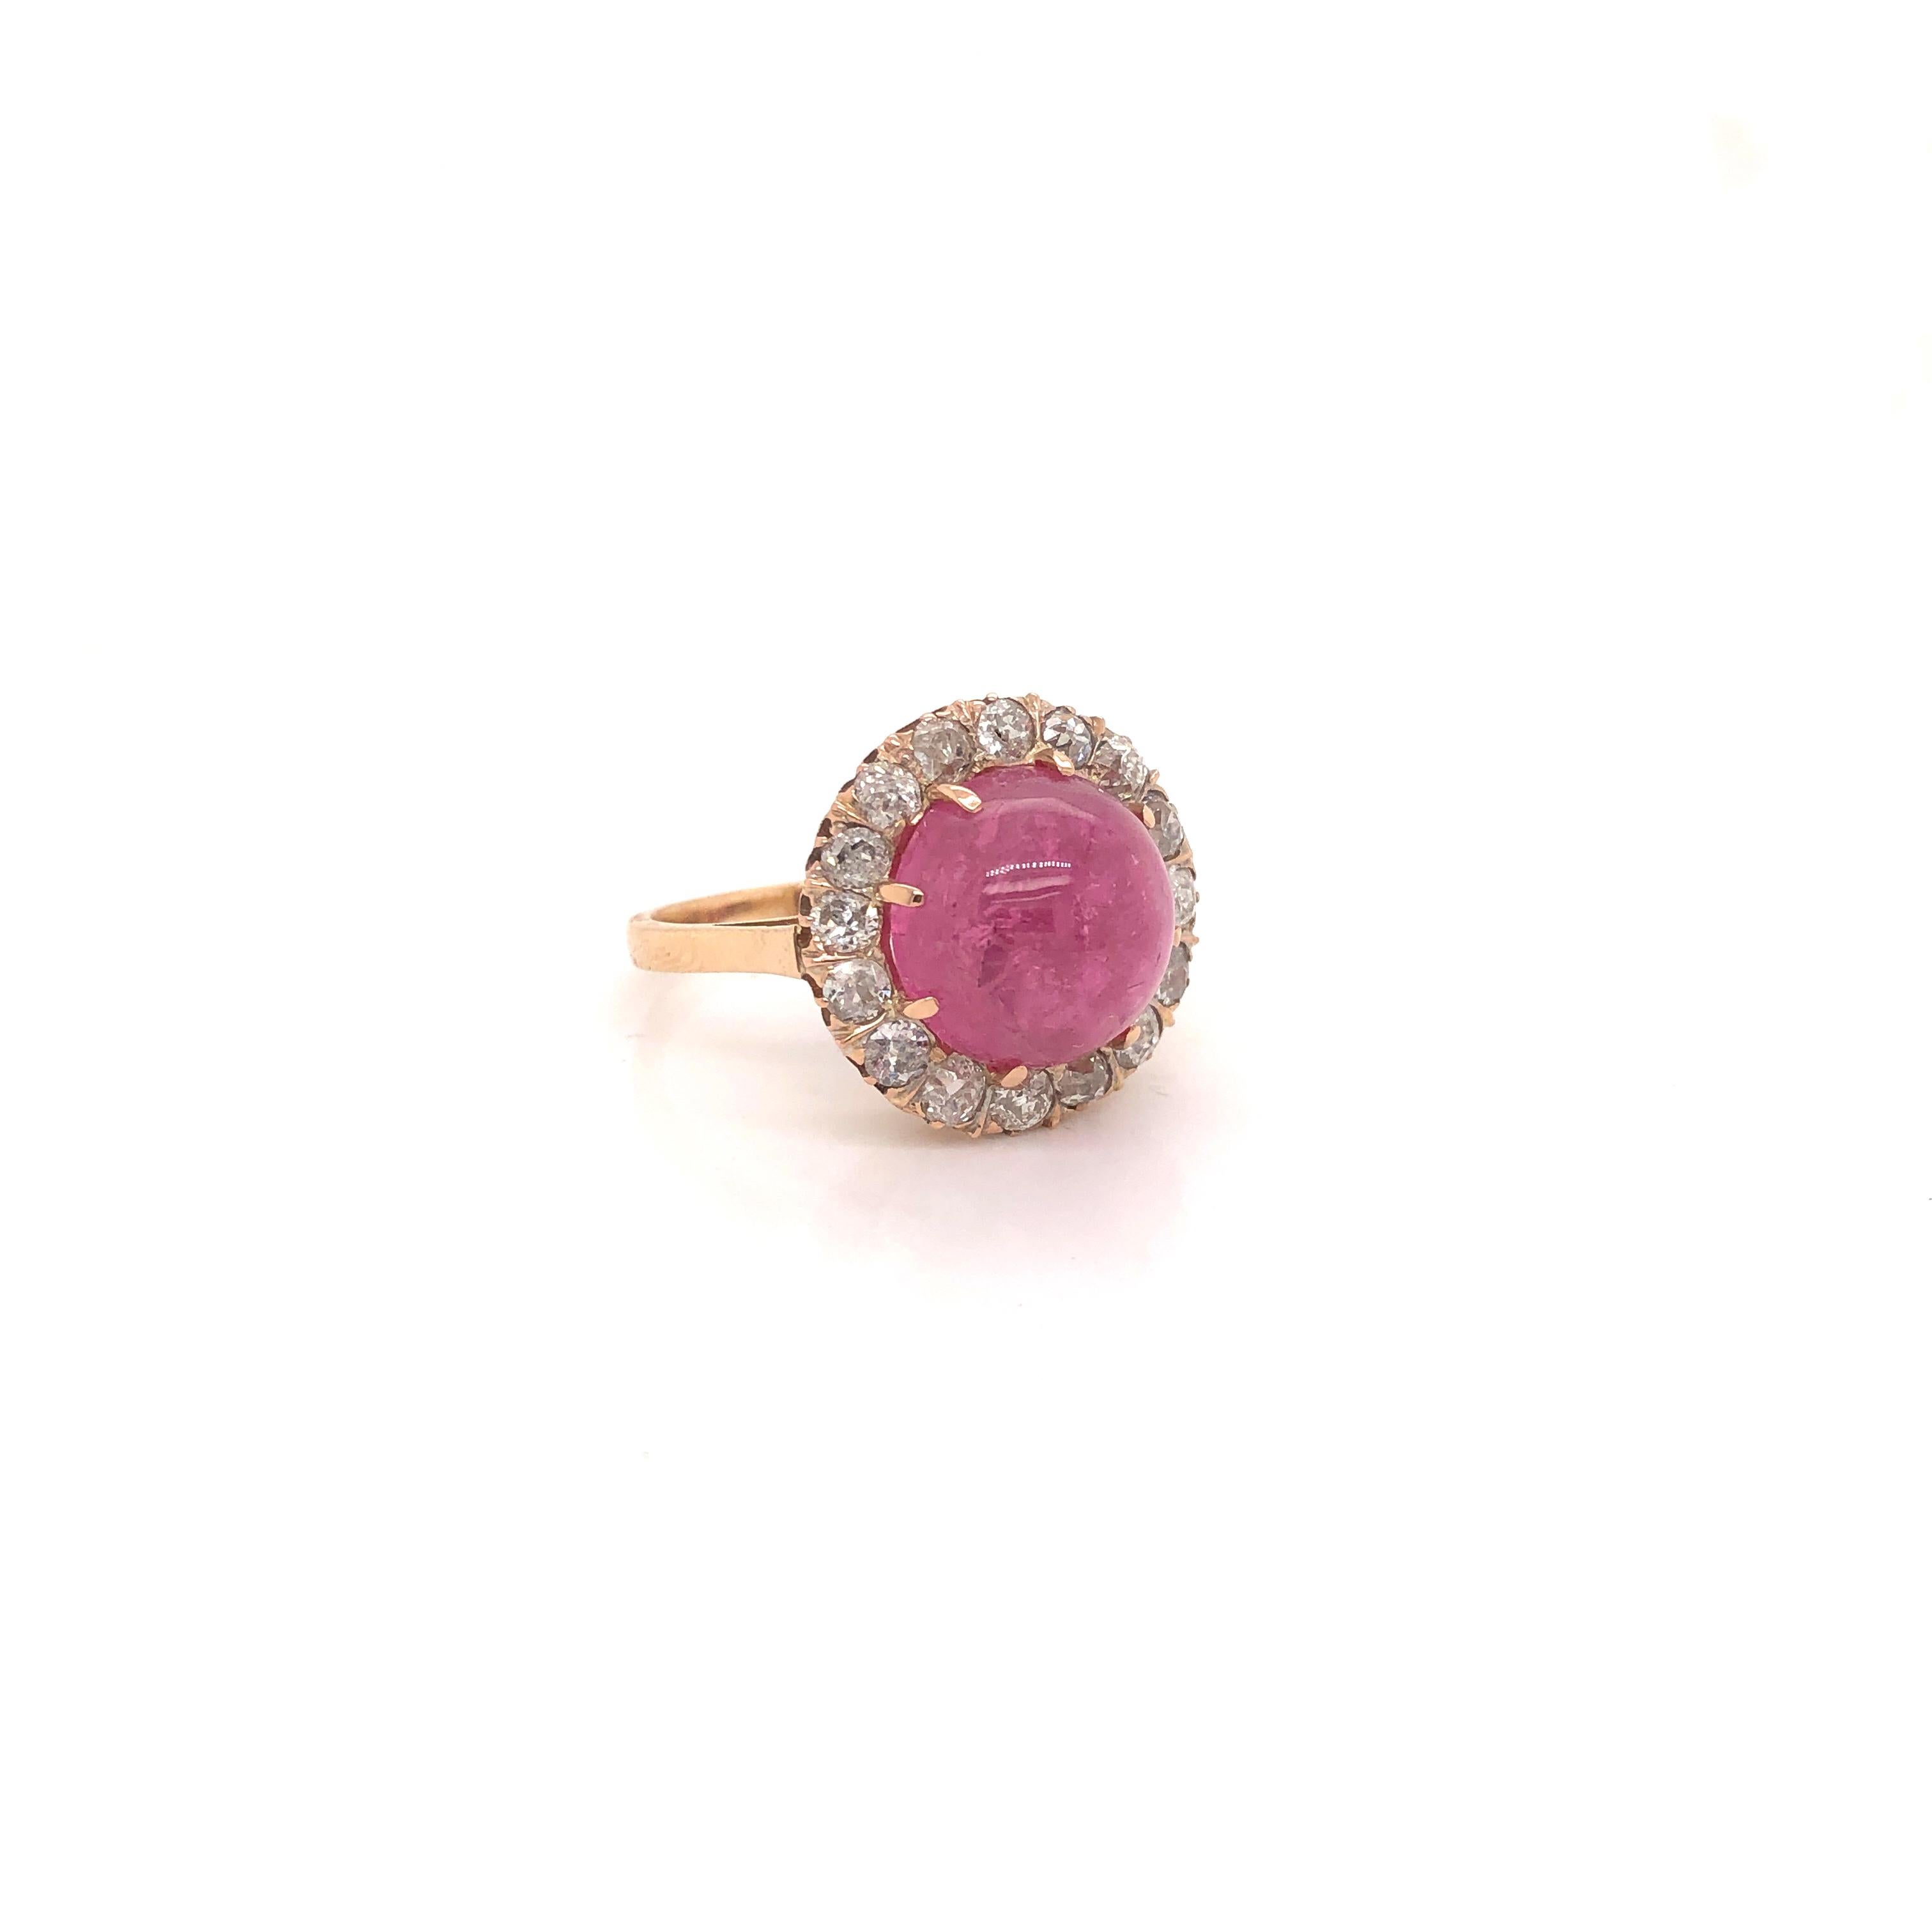 This estate ring is a true beauty. Vivid pink color is seen in this cabochon cut Pink Tourmaline. The ring is crafted in 18k rose gold. Surrounding the main stone is a diamond halo.  The diamond halo is set with all old mine cut diamonds,